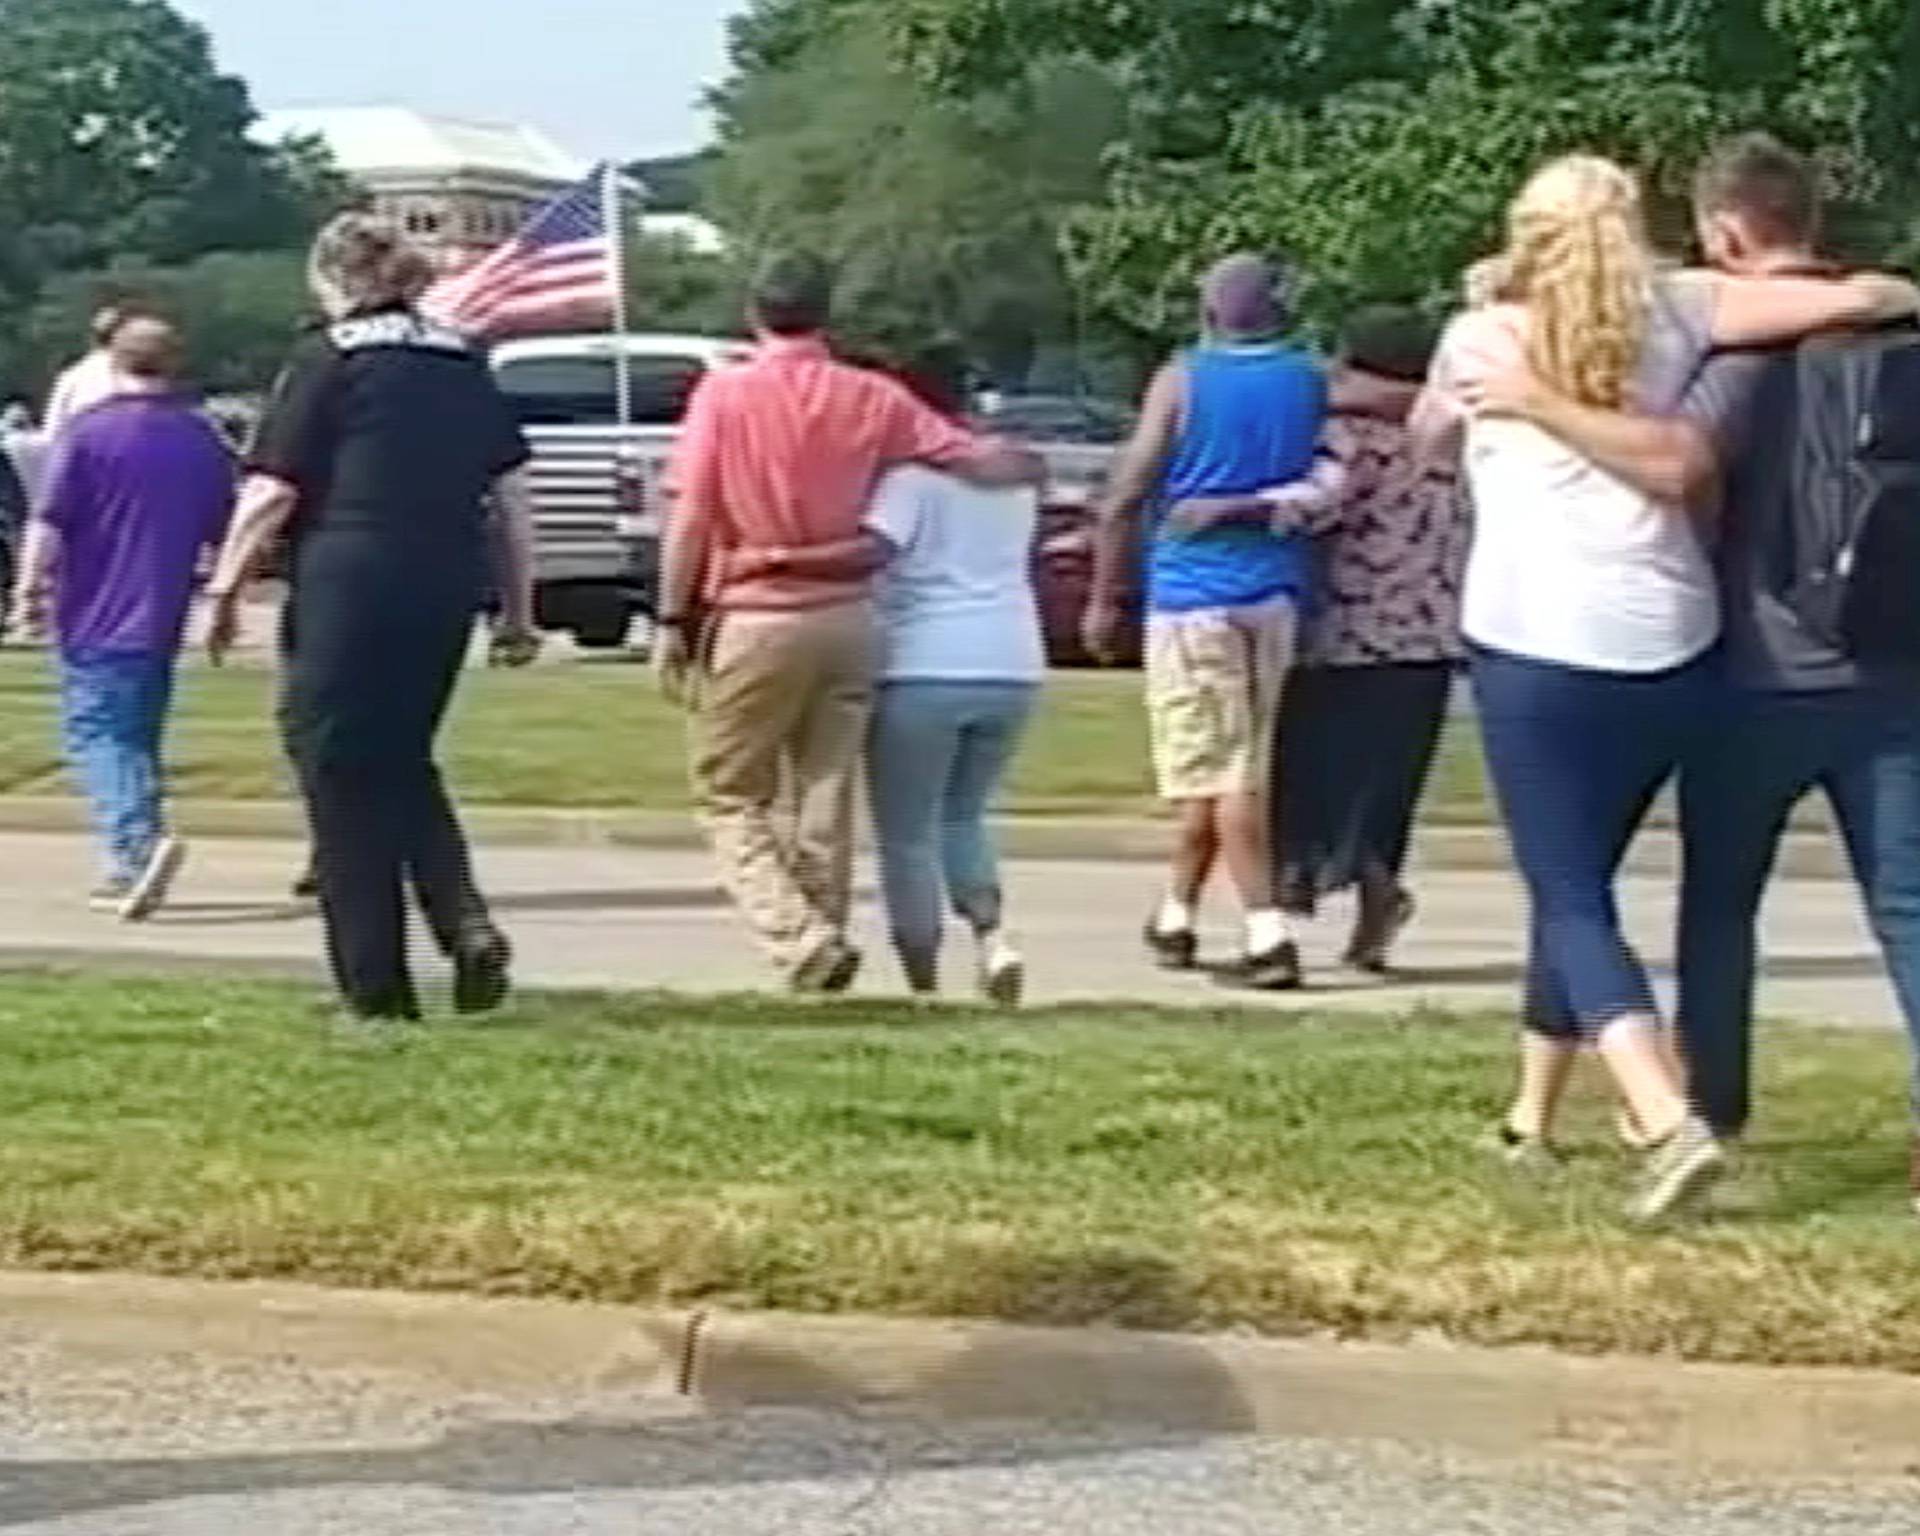 Evacuees walk away from a building in this still image taken from video following a shooting incident at the municipal center in Virginia Beach